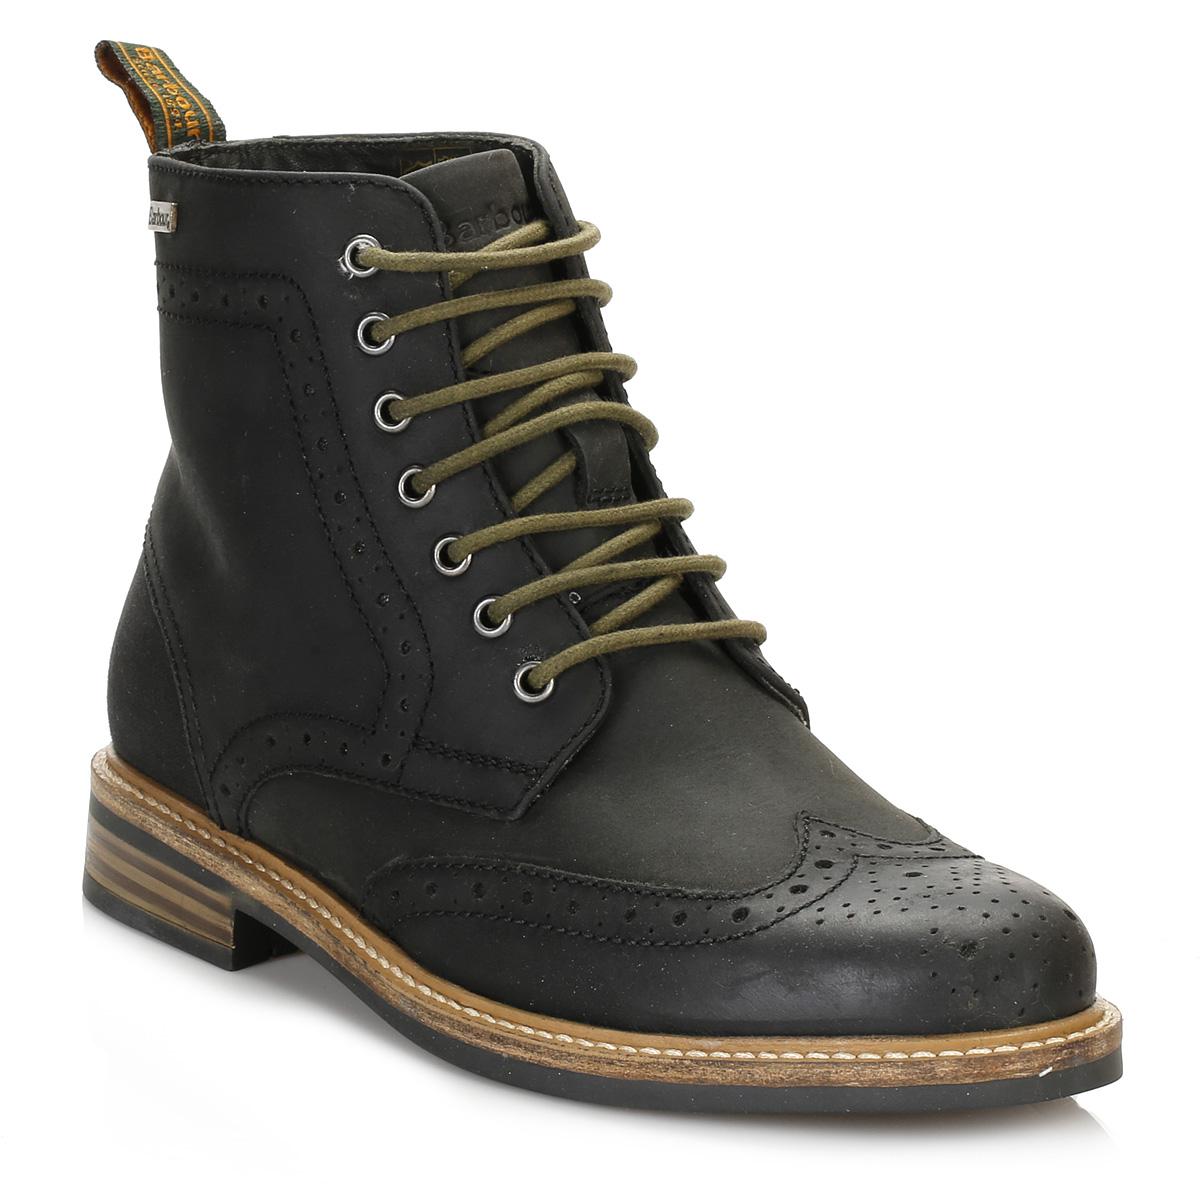 barbour brogue boots Cheaper Than Retail Price> Buy Clothing, Accessories  and lifestyle products for women & men -